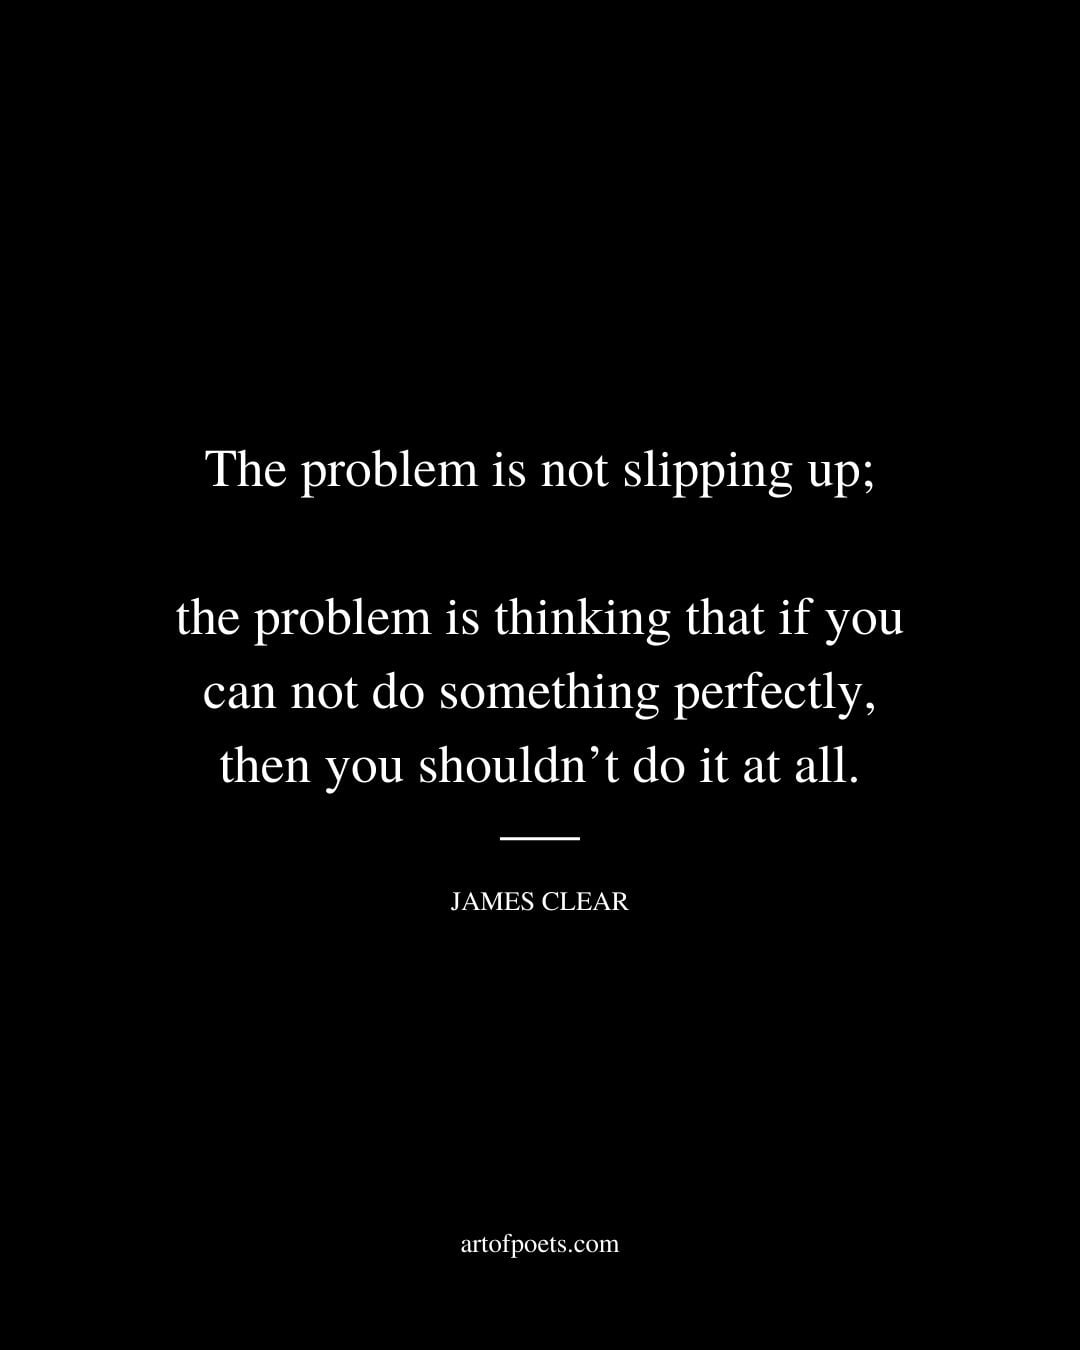 The problem is not slipping up the problem is thinking that if you can not do something perfectly then you shouldnt do it at all